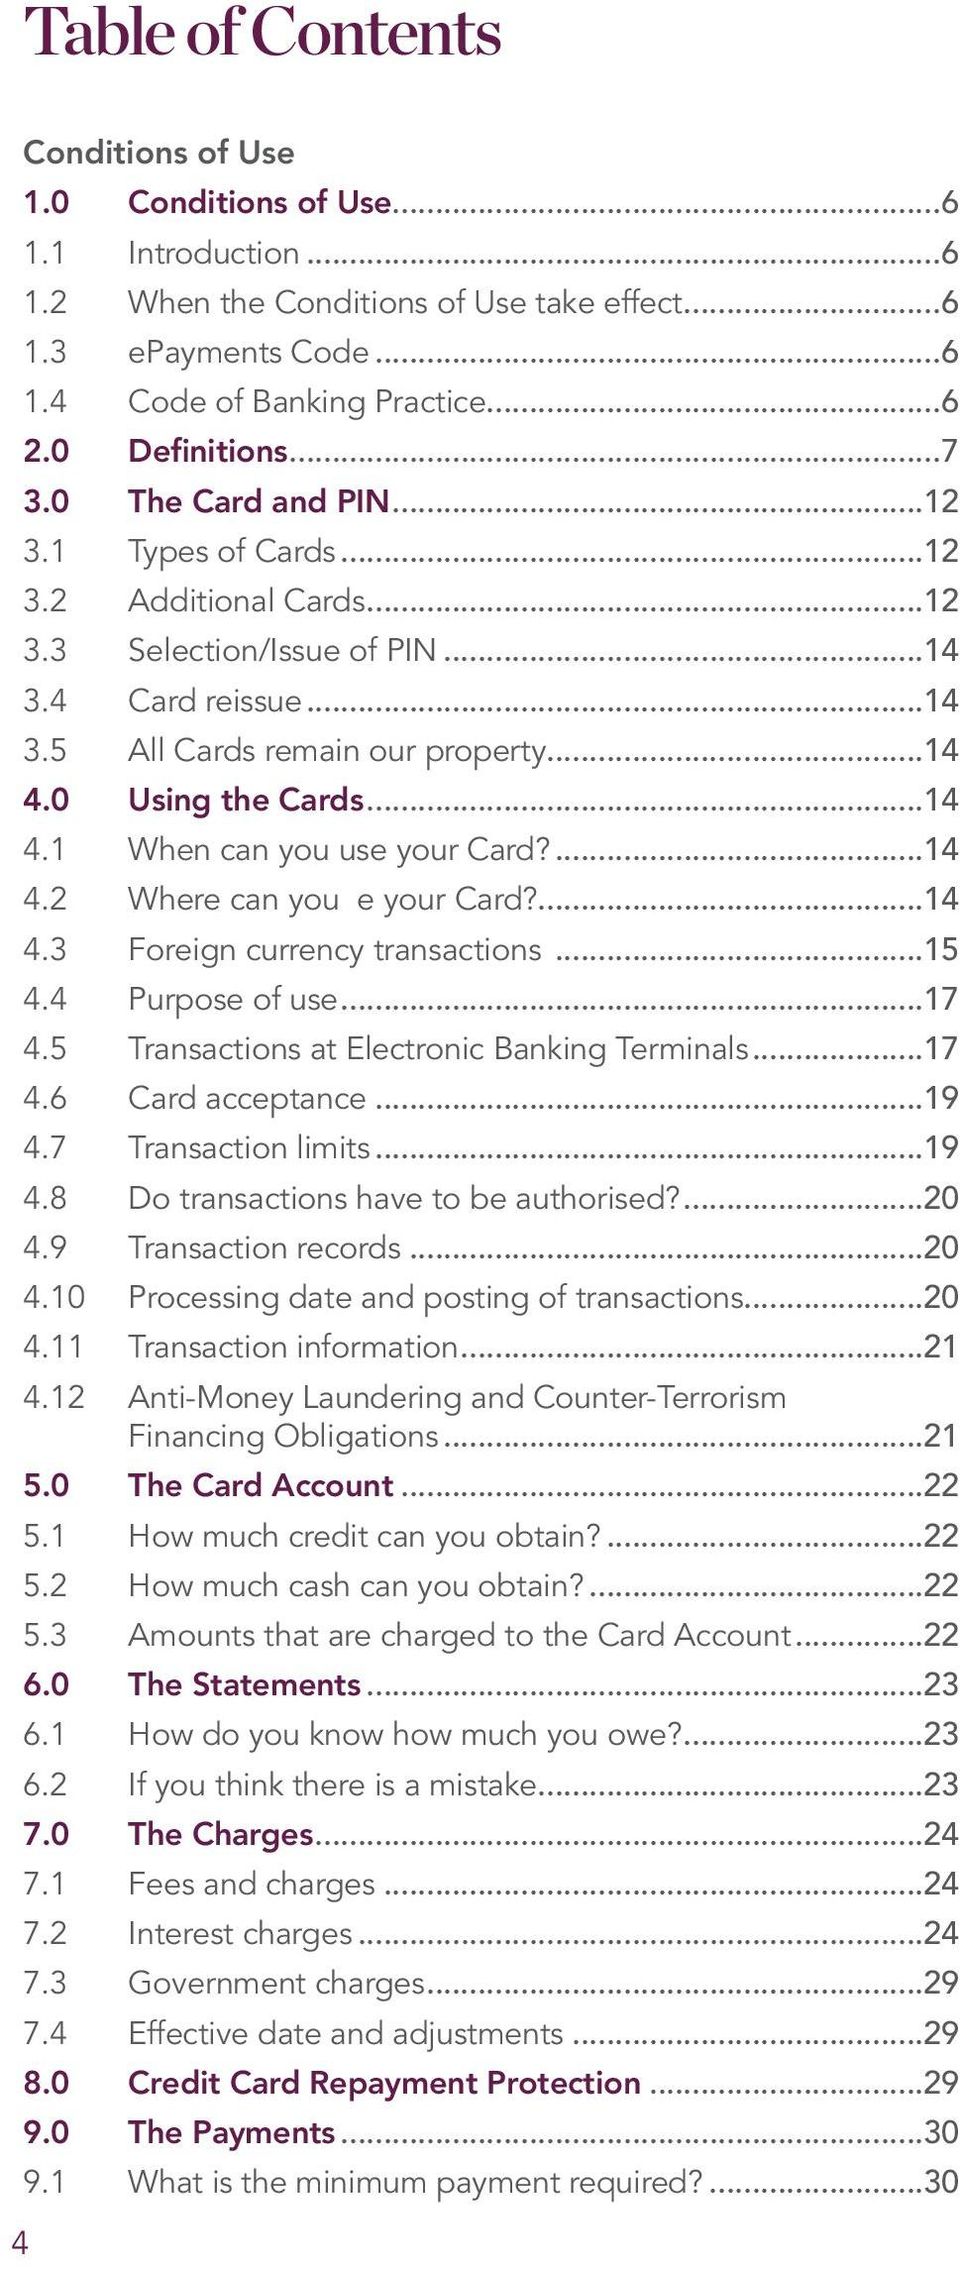 1 When can you use your Card? 14 4.2 Where can you e your Card?14 4.3 Foreign currency transactions 15 4.4 Purpose of use 17 4.5 Transactions at Electronic Banking Terminals 17 4.